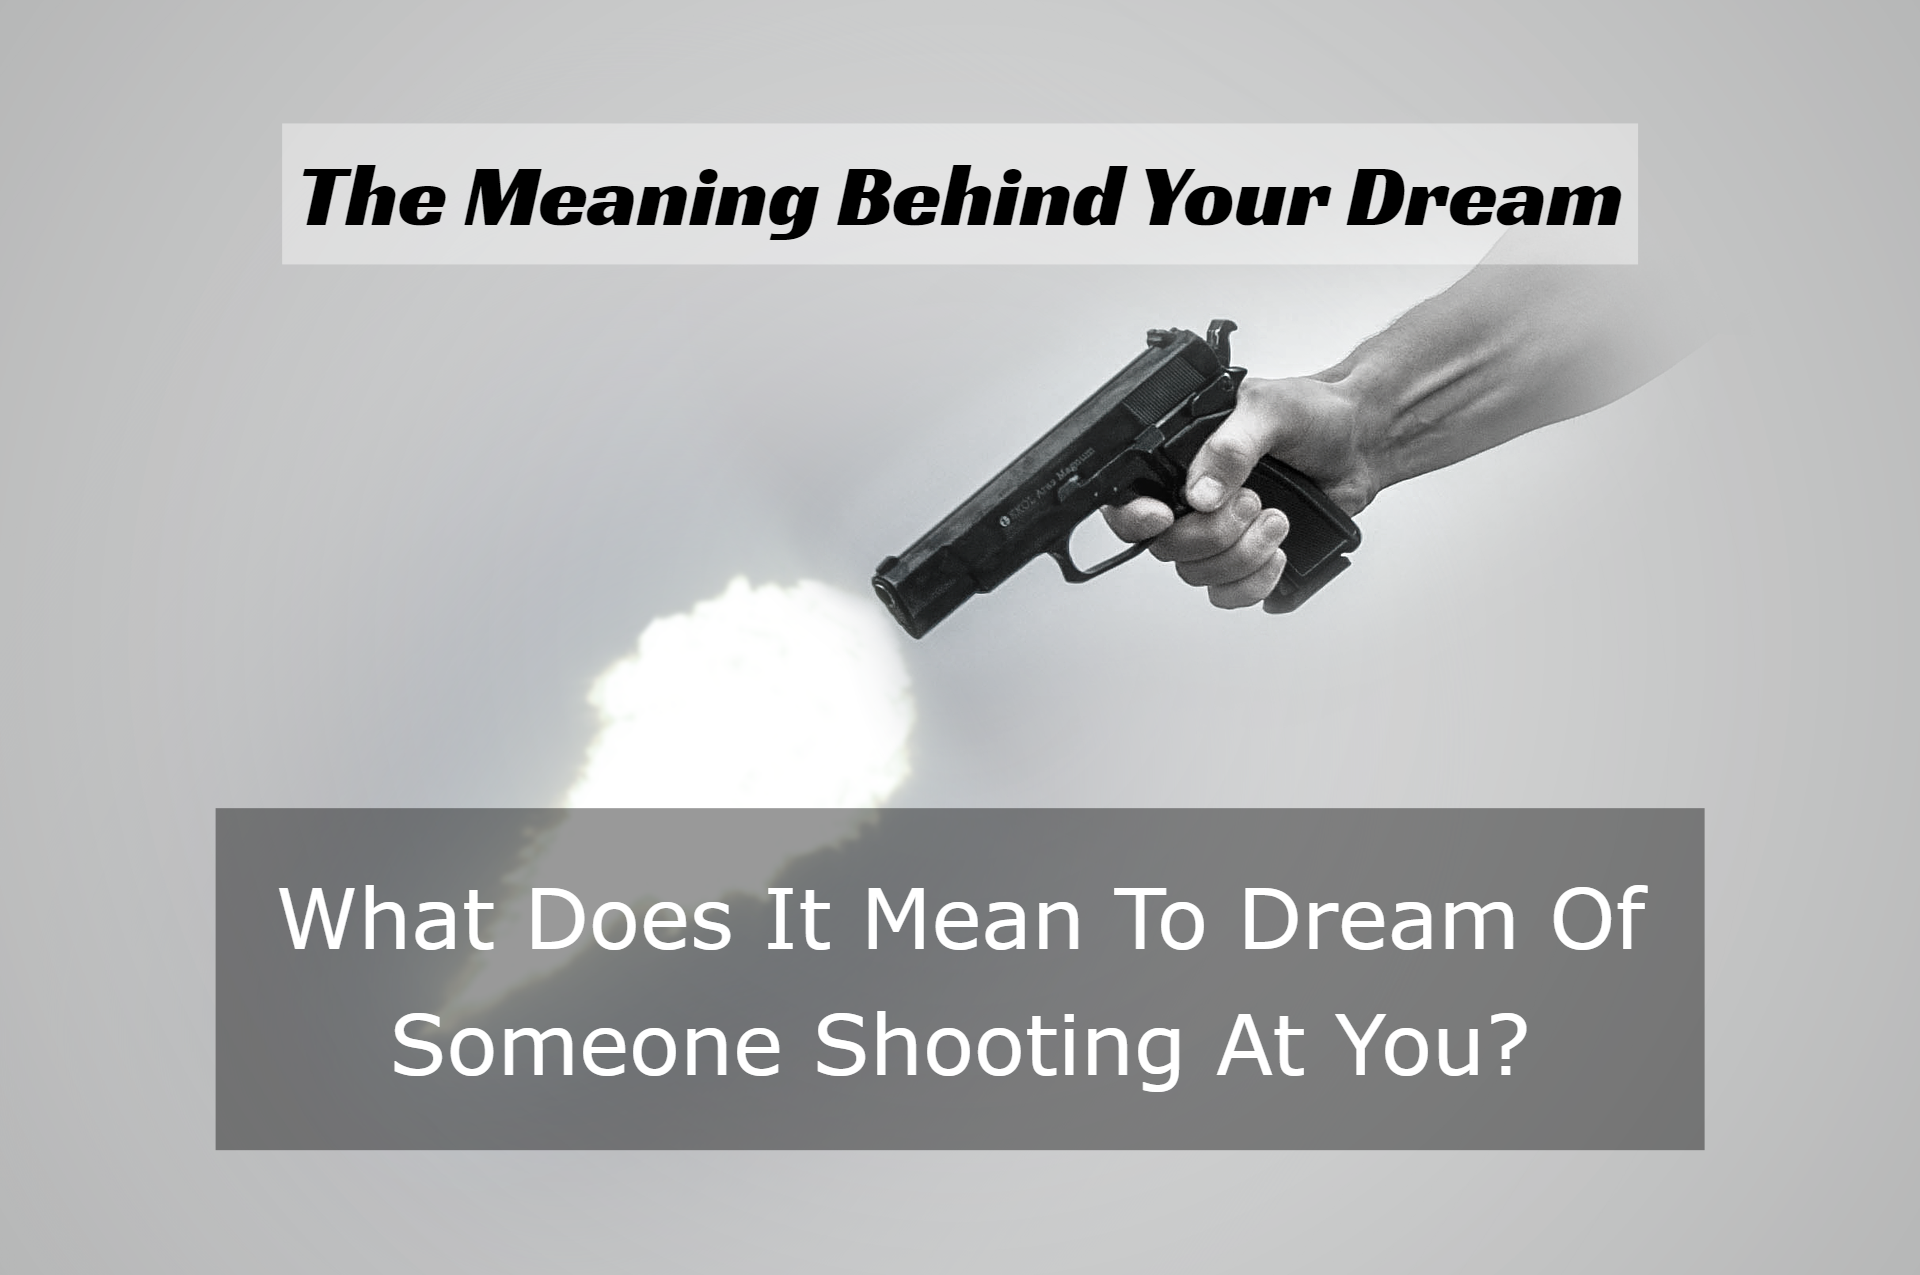 What Does It Mean To Dream Of Someone Shooting At You? The Meaning Behind Your Dream